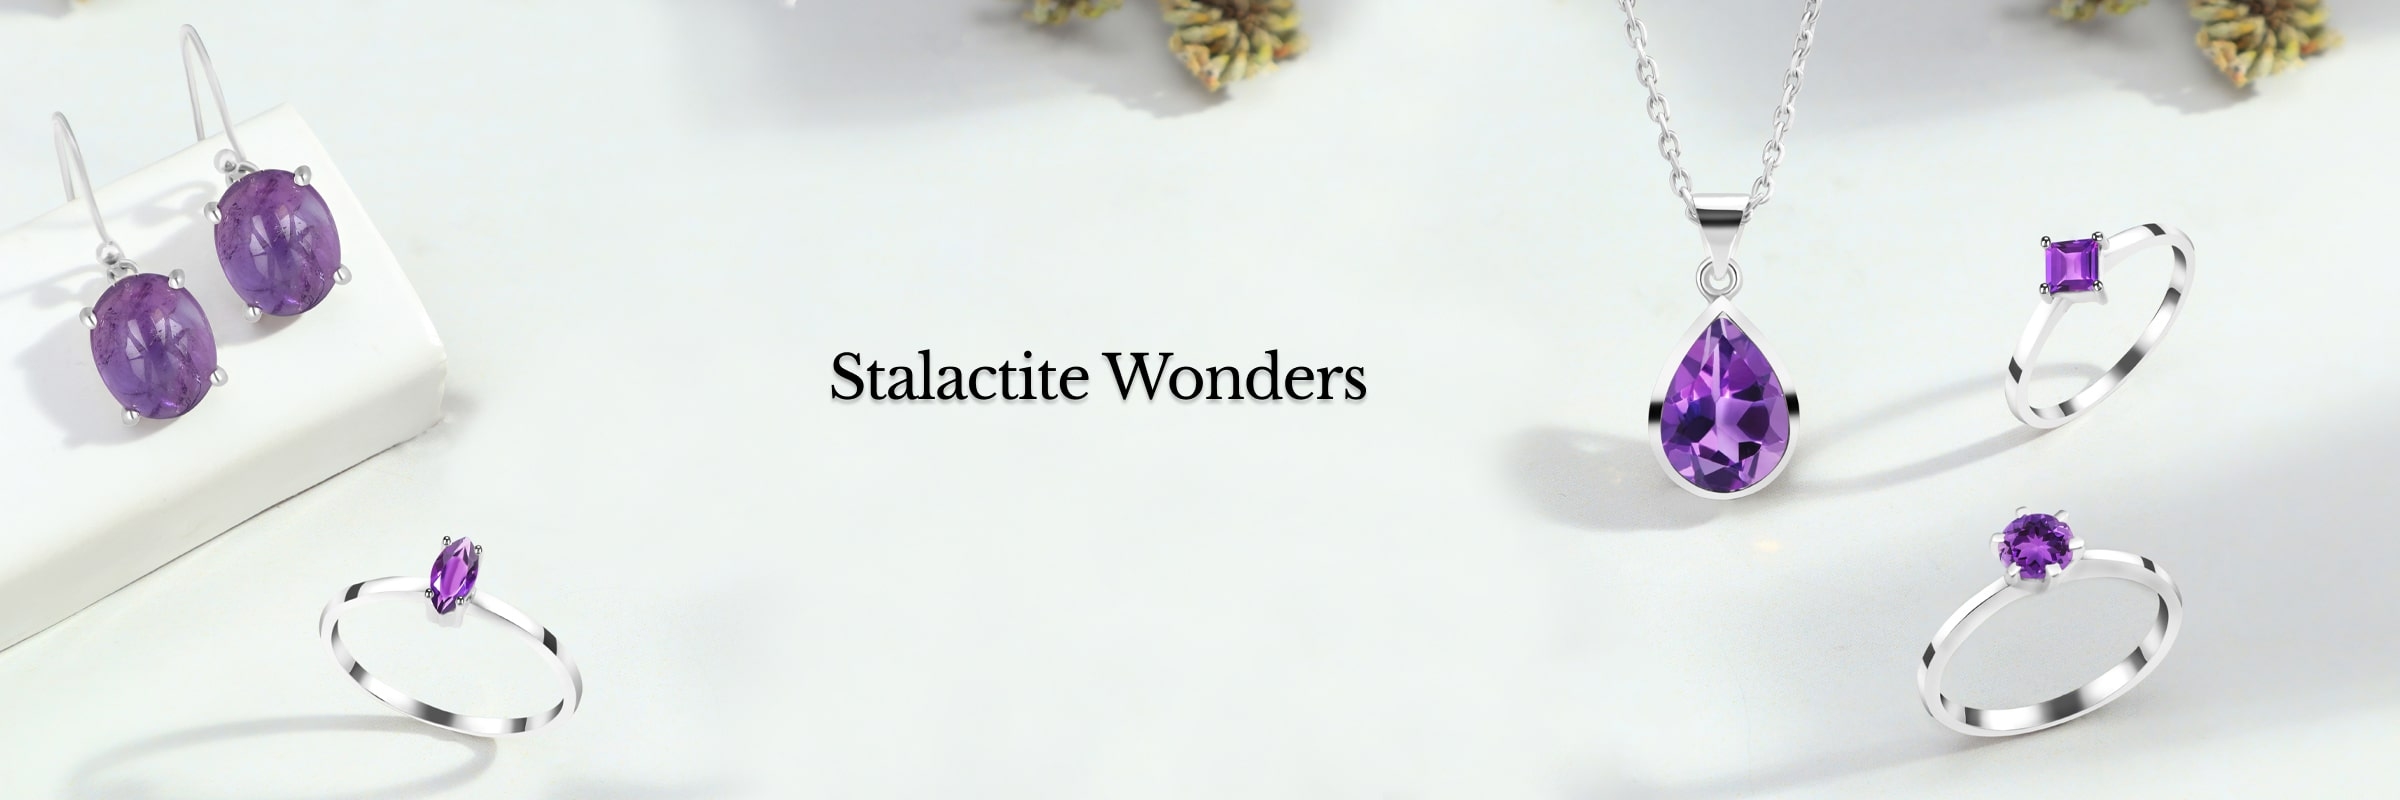 What is Stalactite